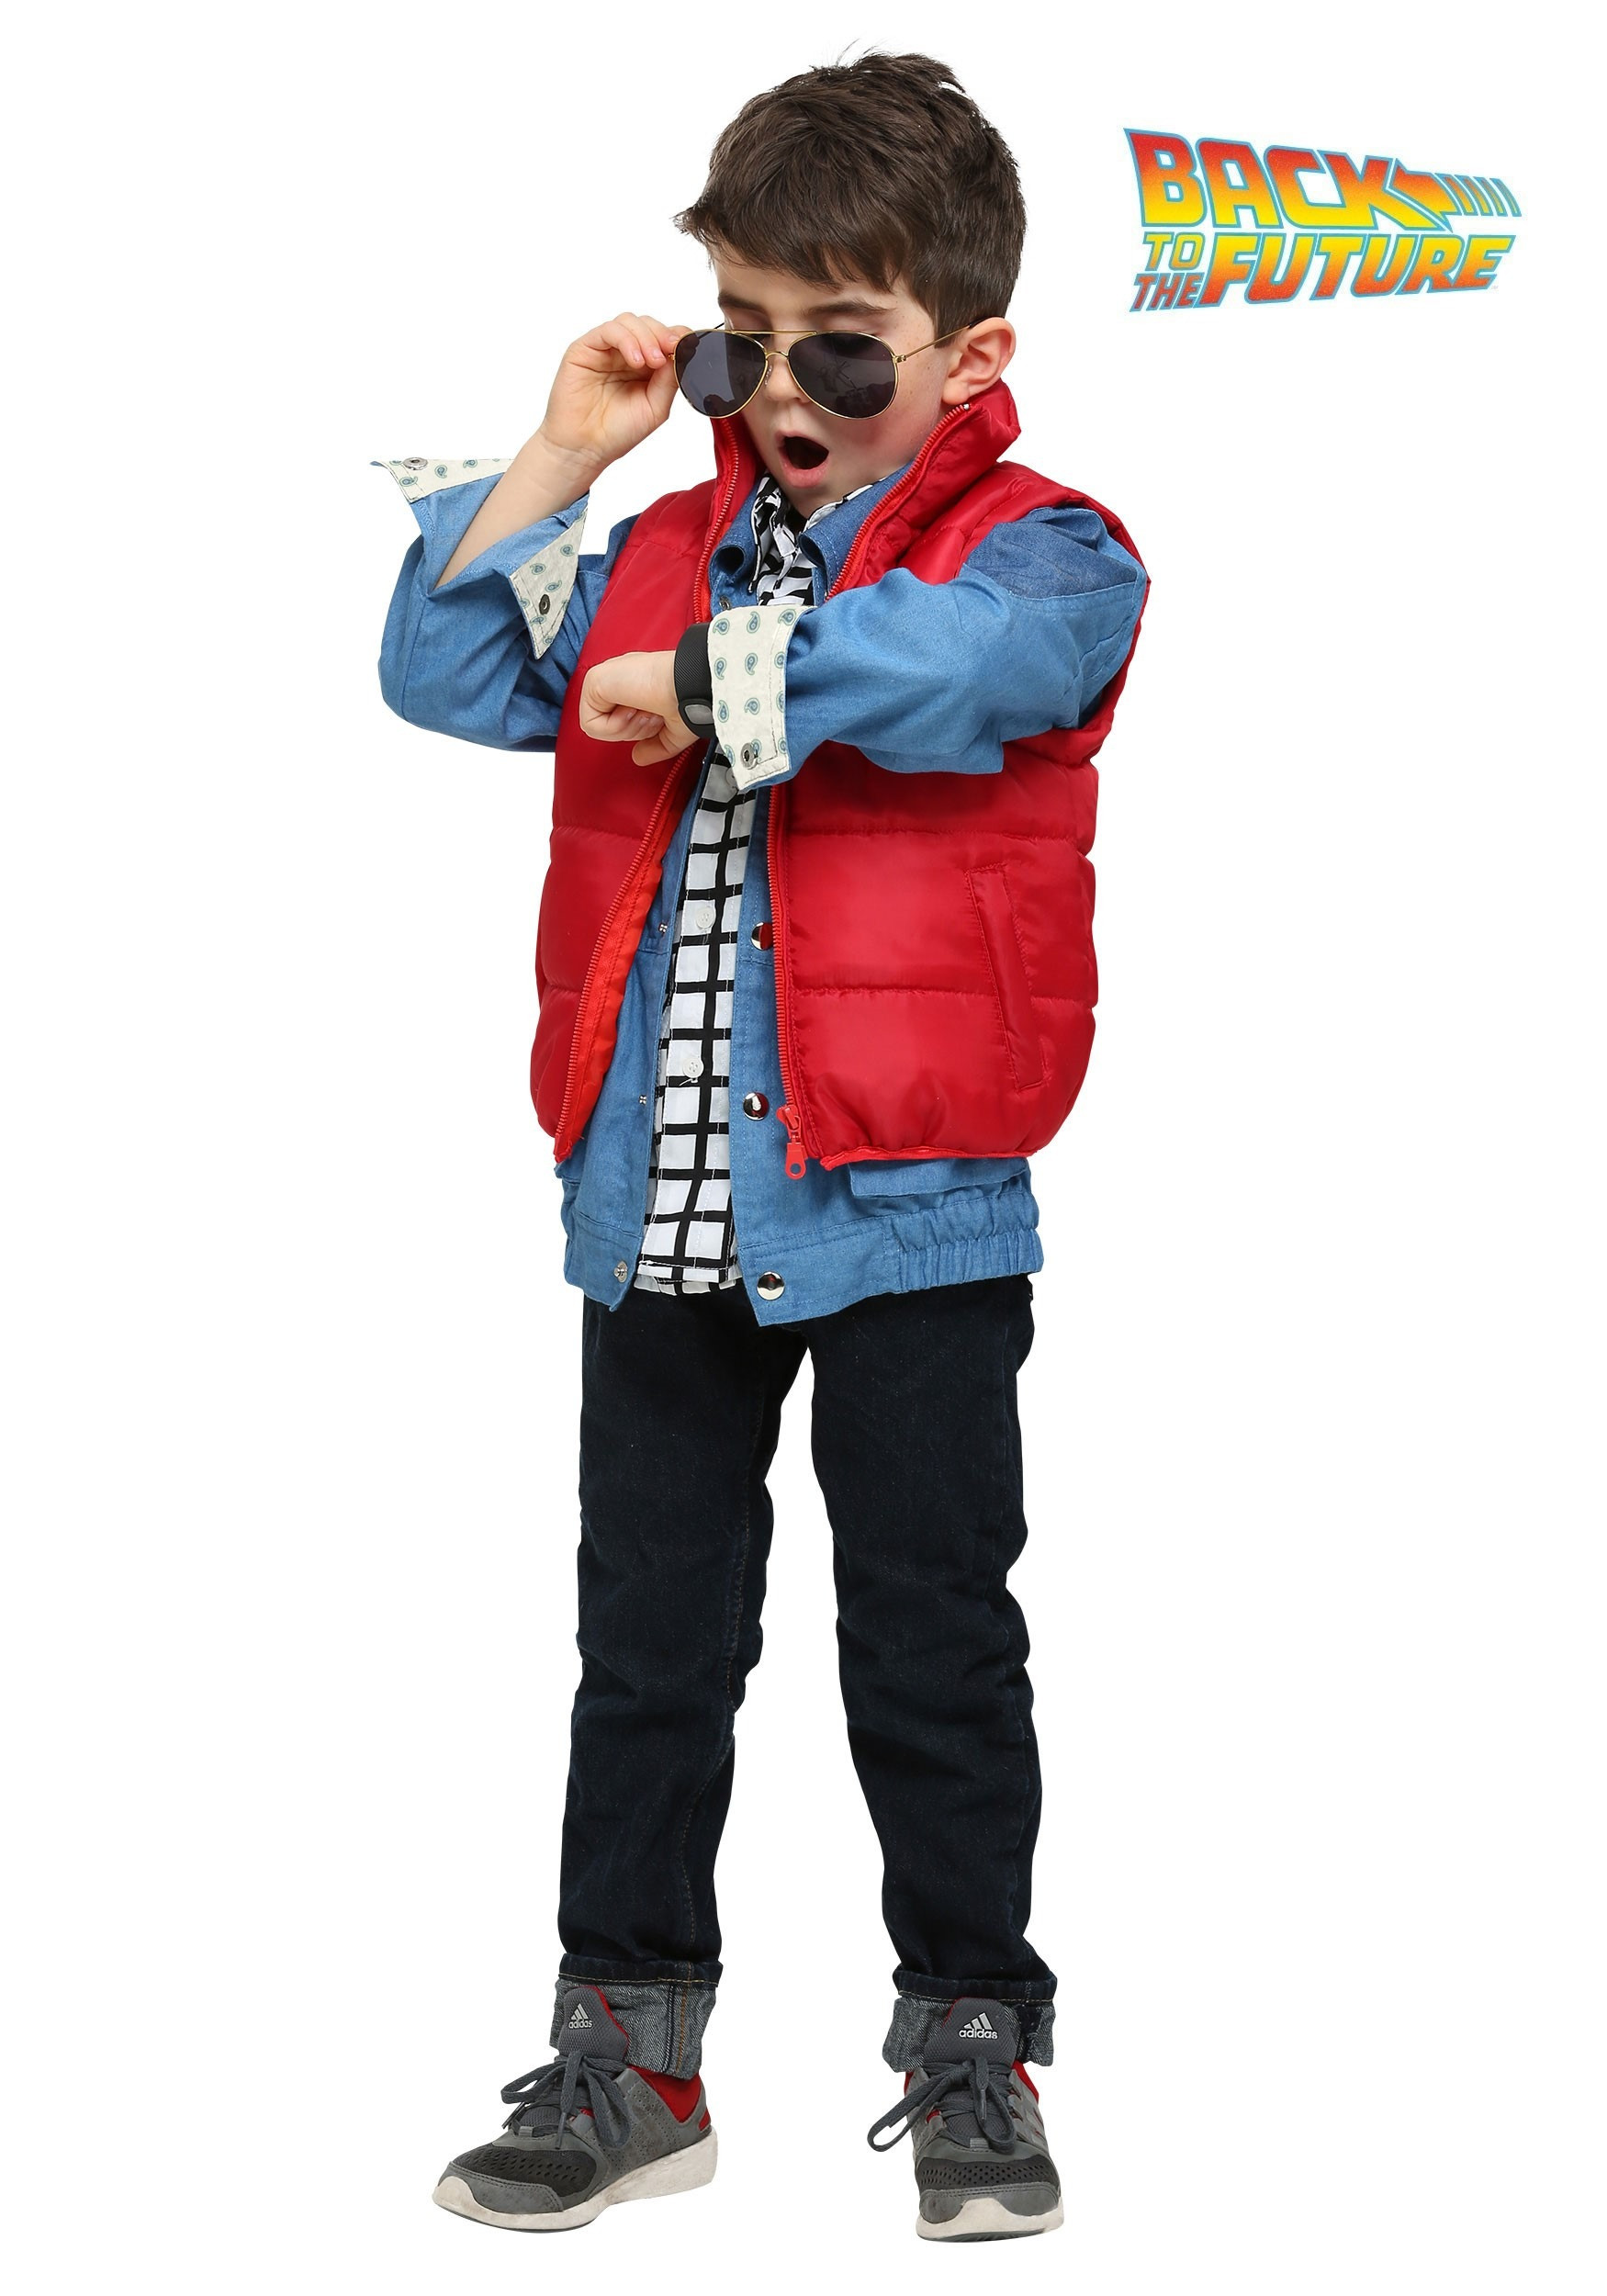 DIY Marty Mcfly Costume
 Back to the Future Marty McFly Costume for Toddlers